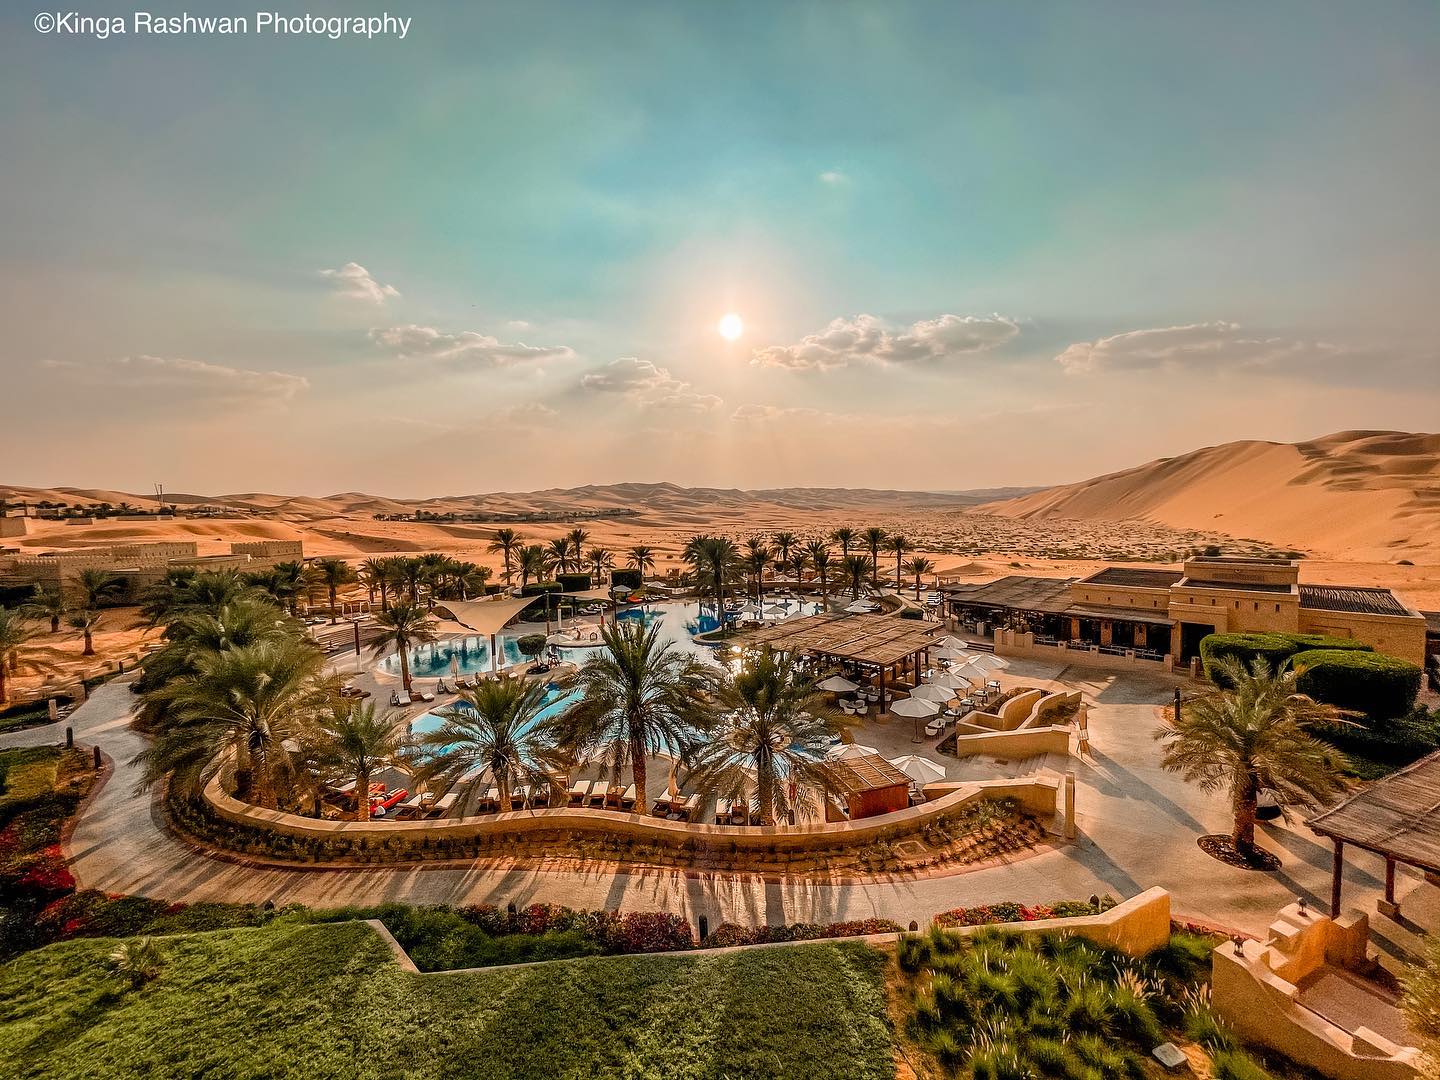 Somewhere in the middle of the desert 🌴🇦🇪☀️

This is a magical place in the desert, where the beautiful views of the sand dunes and the oasis surrounding the hotel create an incredible harmony. This hotel is the perfect place to relax and immerse yourself in the beauty of nature. I recommend it to anyone seeking a unique experience in the heart of the desert.
.
.

Have you ever seen a desert?
.
.
. 
📍 @anantaraqasralsarab ❤️👌🏼🌴
.

#desertsafari  #wiecejnizdubaj #ciekawostkioemiratach #polkinaobczyznie #polkawemiratach #deserttime #inabudhabi #beduin #visitabudhabi  #bloggerlifephotos  #instatravels #travelmemory #abudhabidesert #qasralsarab #anantaraqasralsarab #getlostwithwizz #kobiecafotoszkoła #whatsonabudhabi #inabudhabi🇦🇪 #thisisabudhabi #abudhabiworld #sanddunes #dunes #desertdubai #anantara